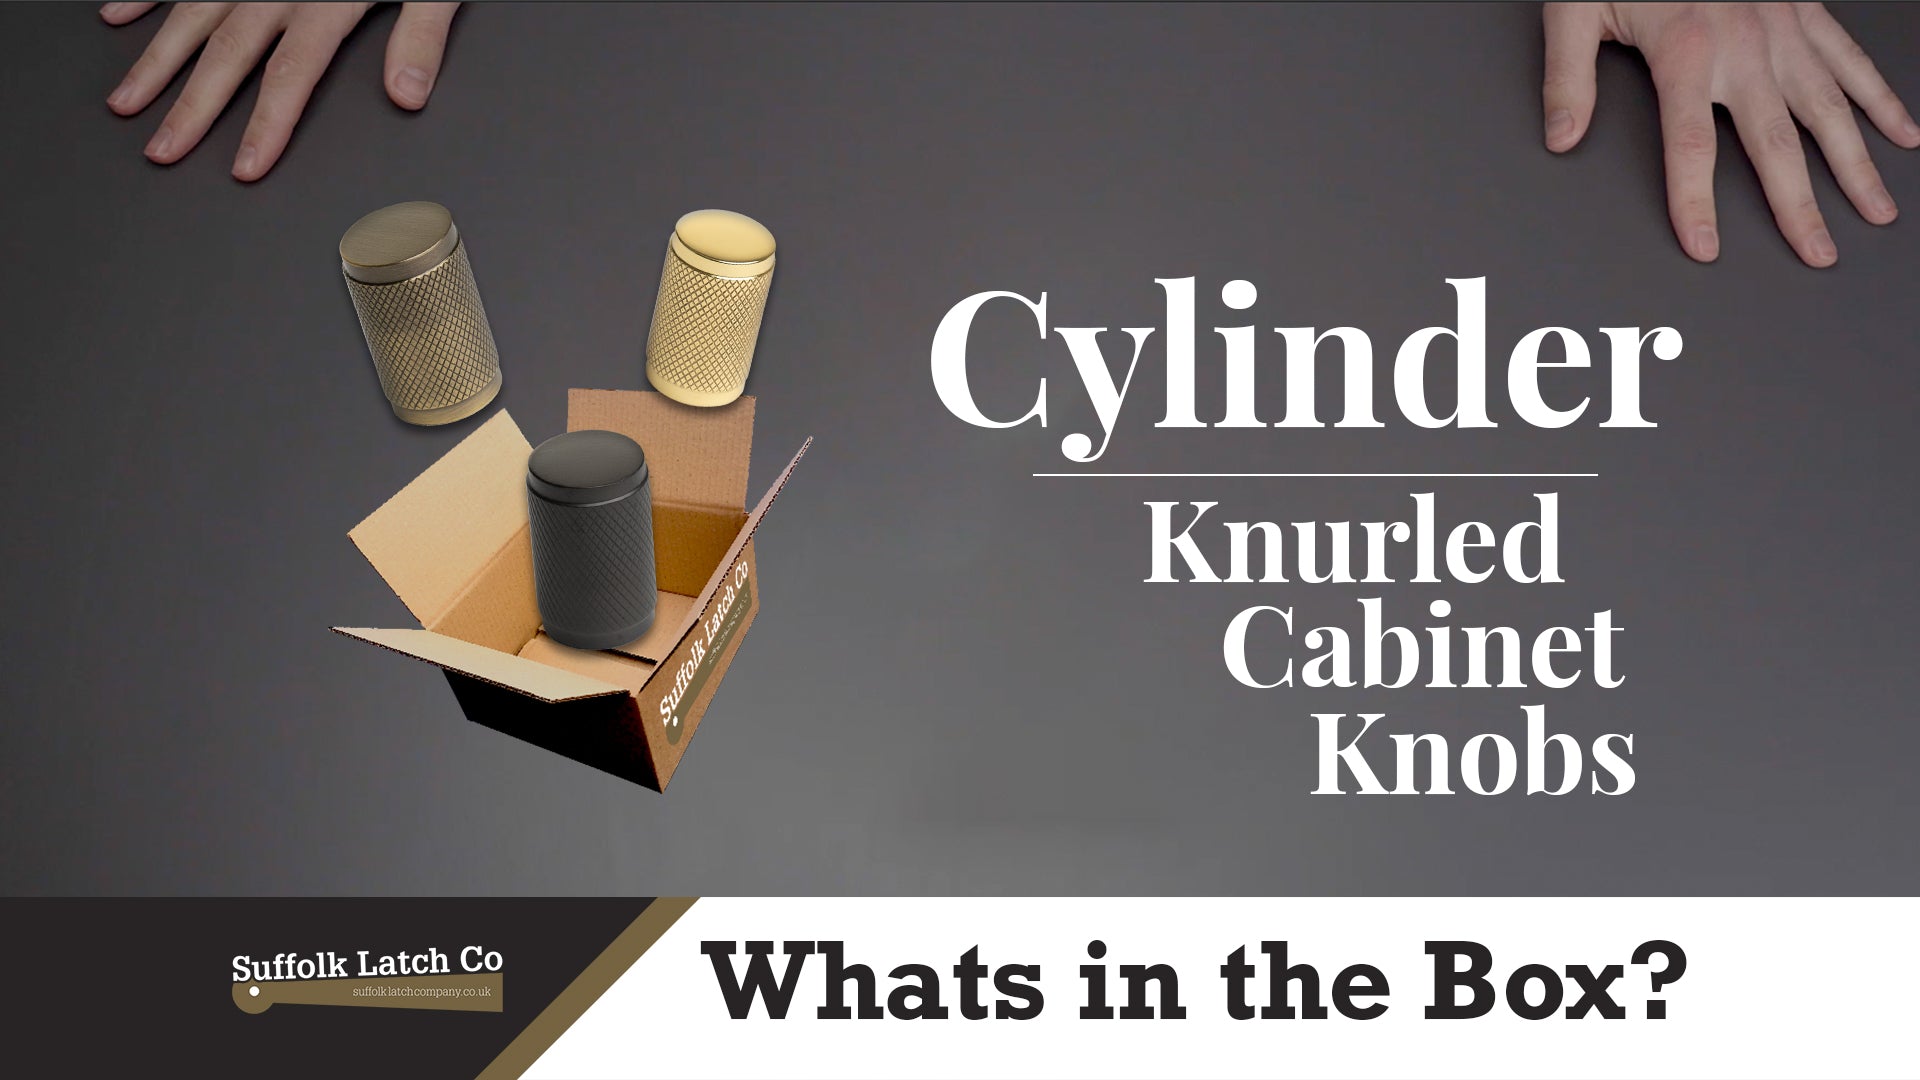 What's In The Box: Cylinder Knurled Cabinet Knobs